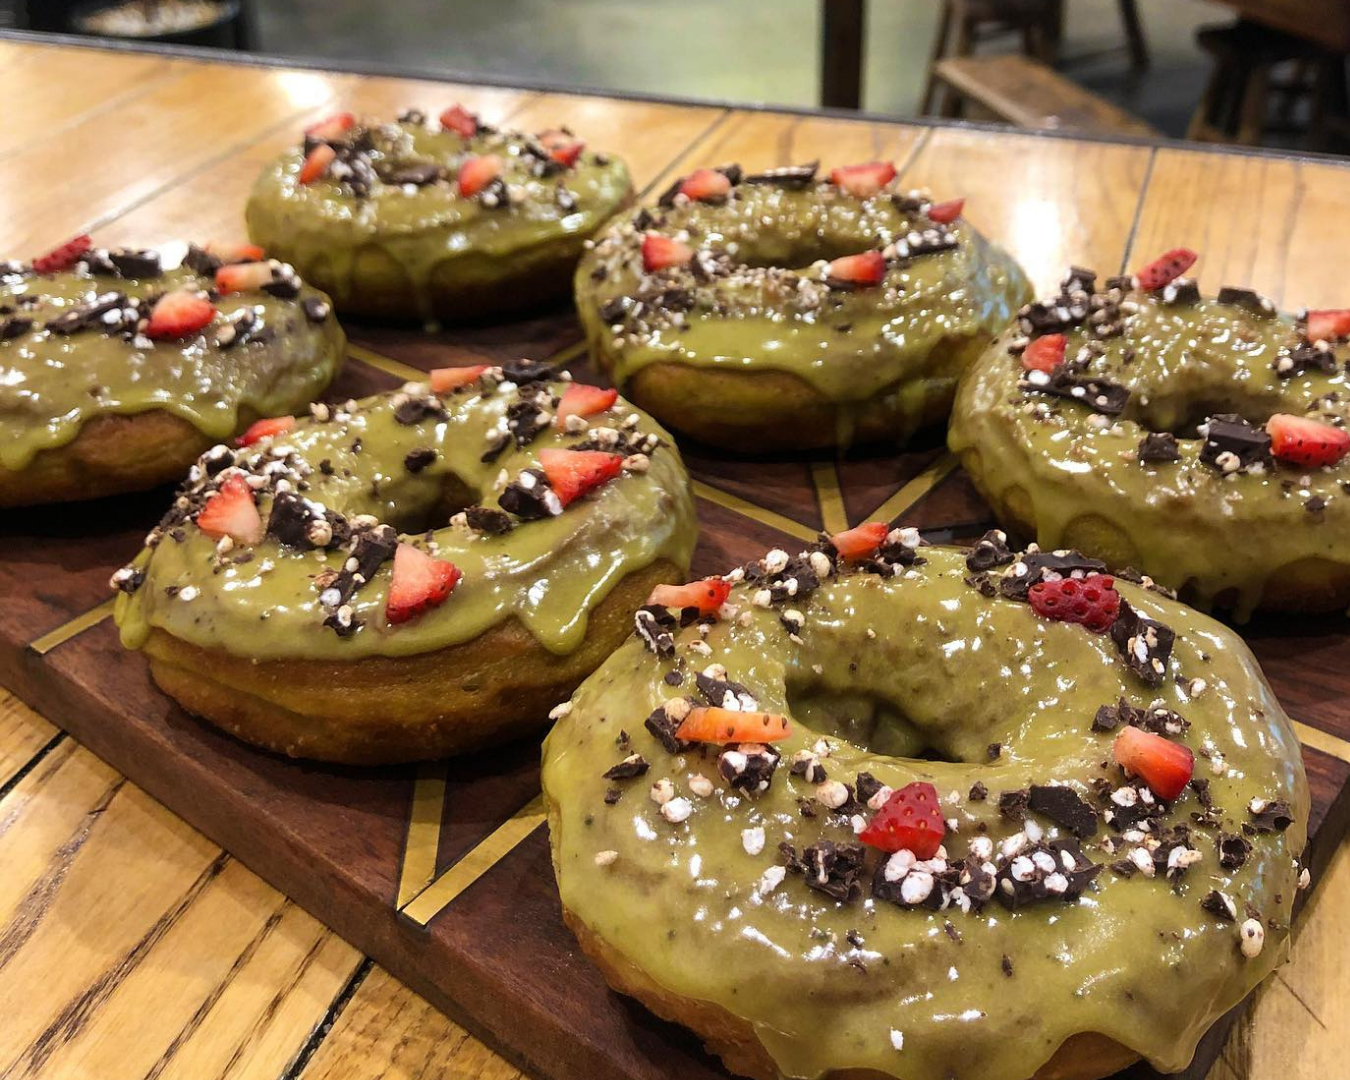 6 perfect matcha donuts by Watson’s Eatery